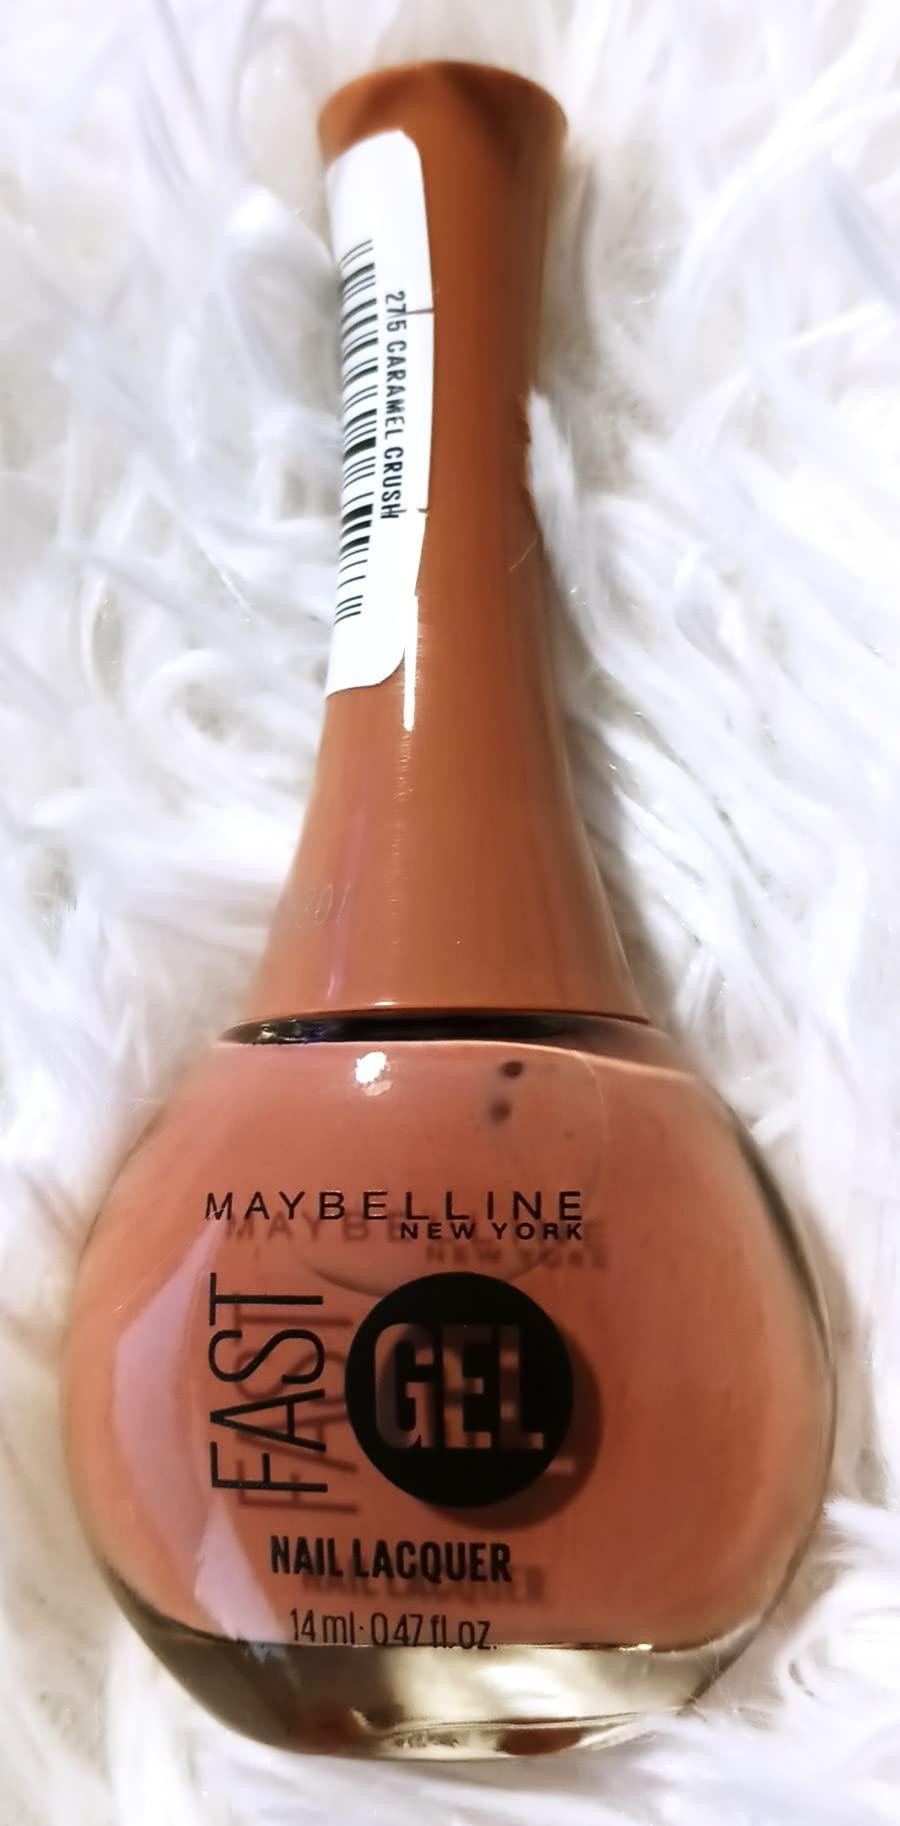 Maybelline New York Fast Gel Crush Nail Lacquer Caramel in